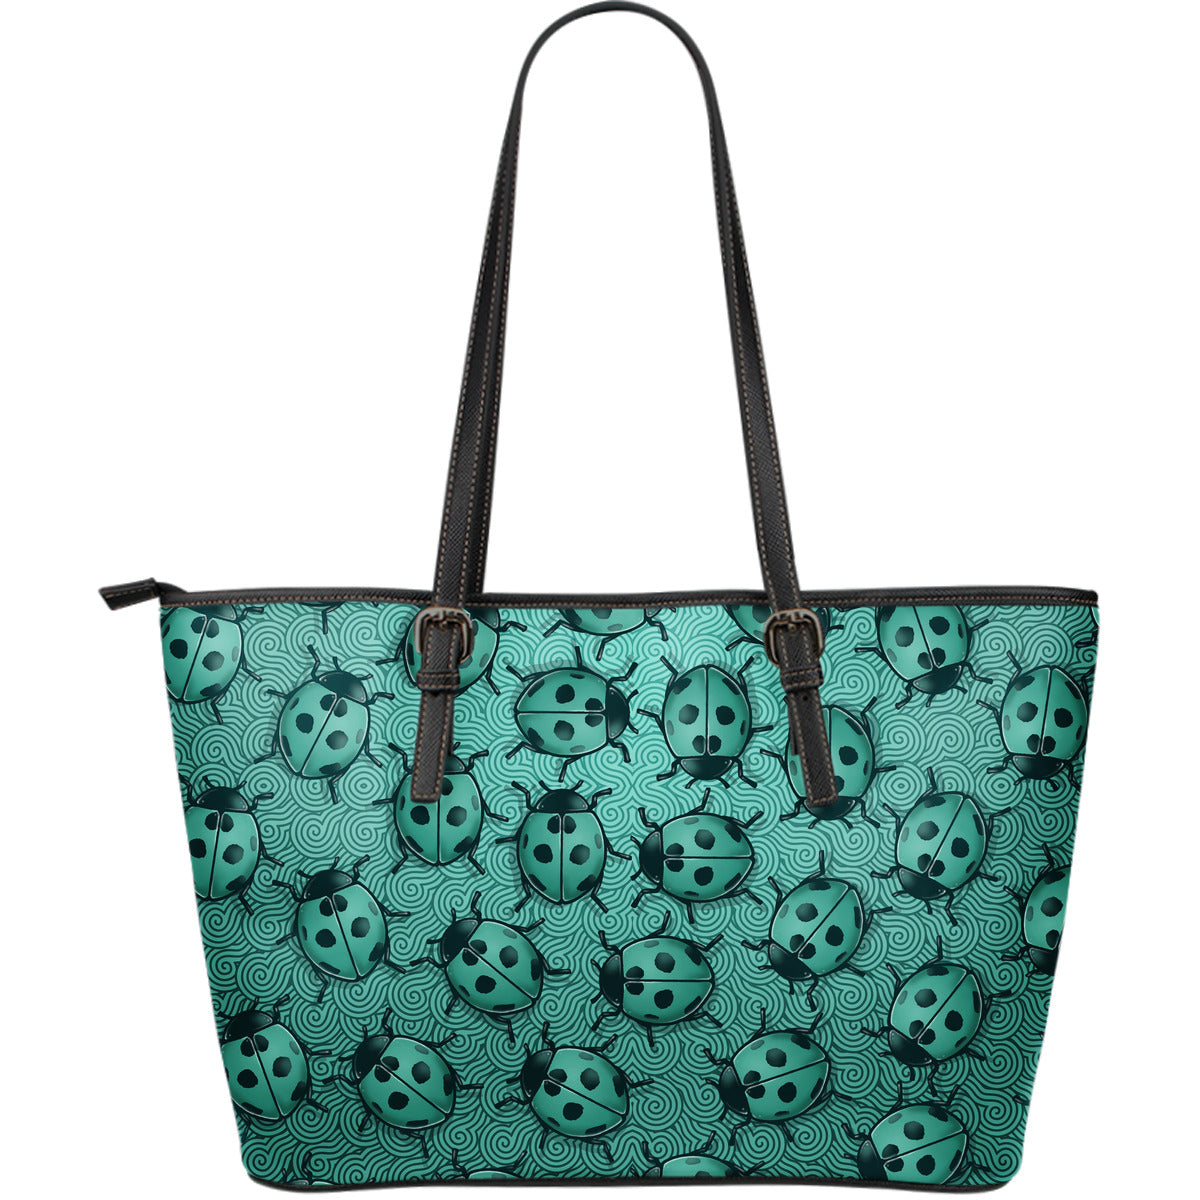 Lady Bug Swirl Large Leather Tote Bag - Teal